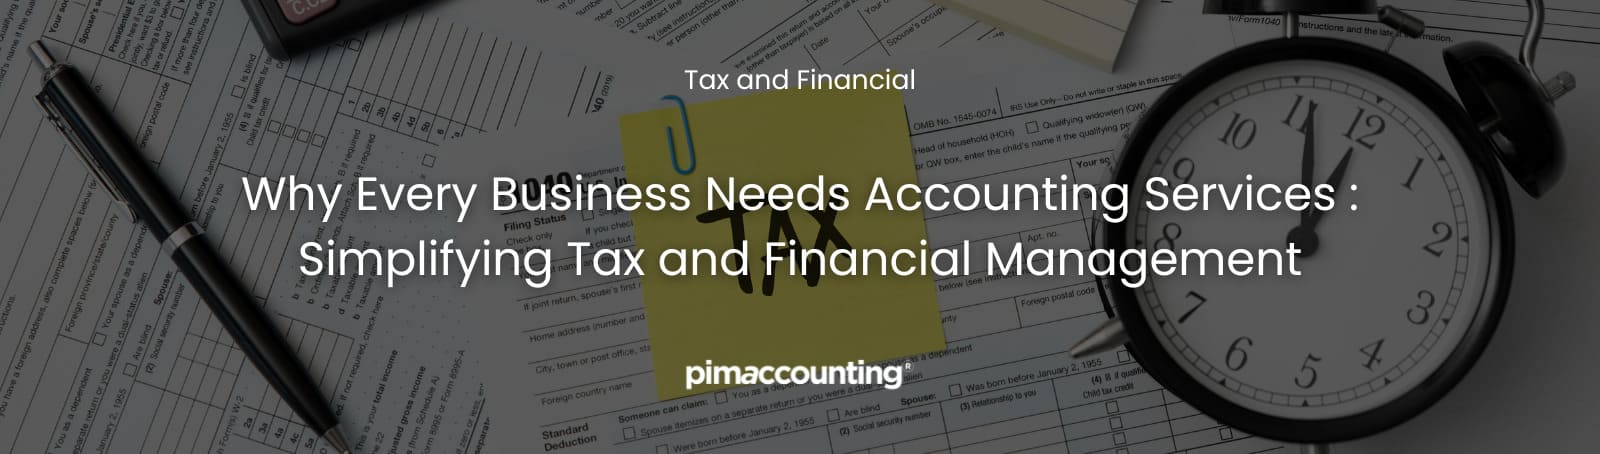 Why Every Business Needs Accounting Services: Simplifying Tax and Financial Management